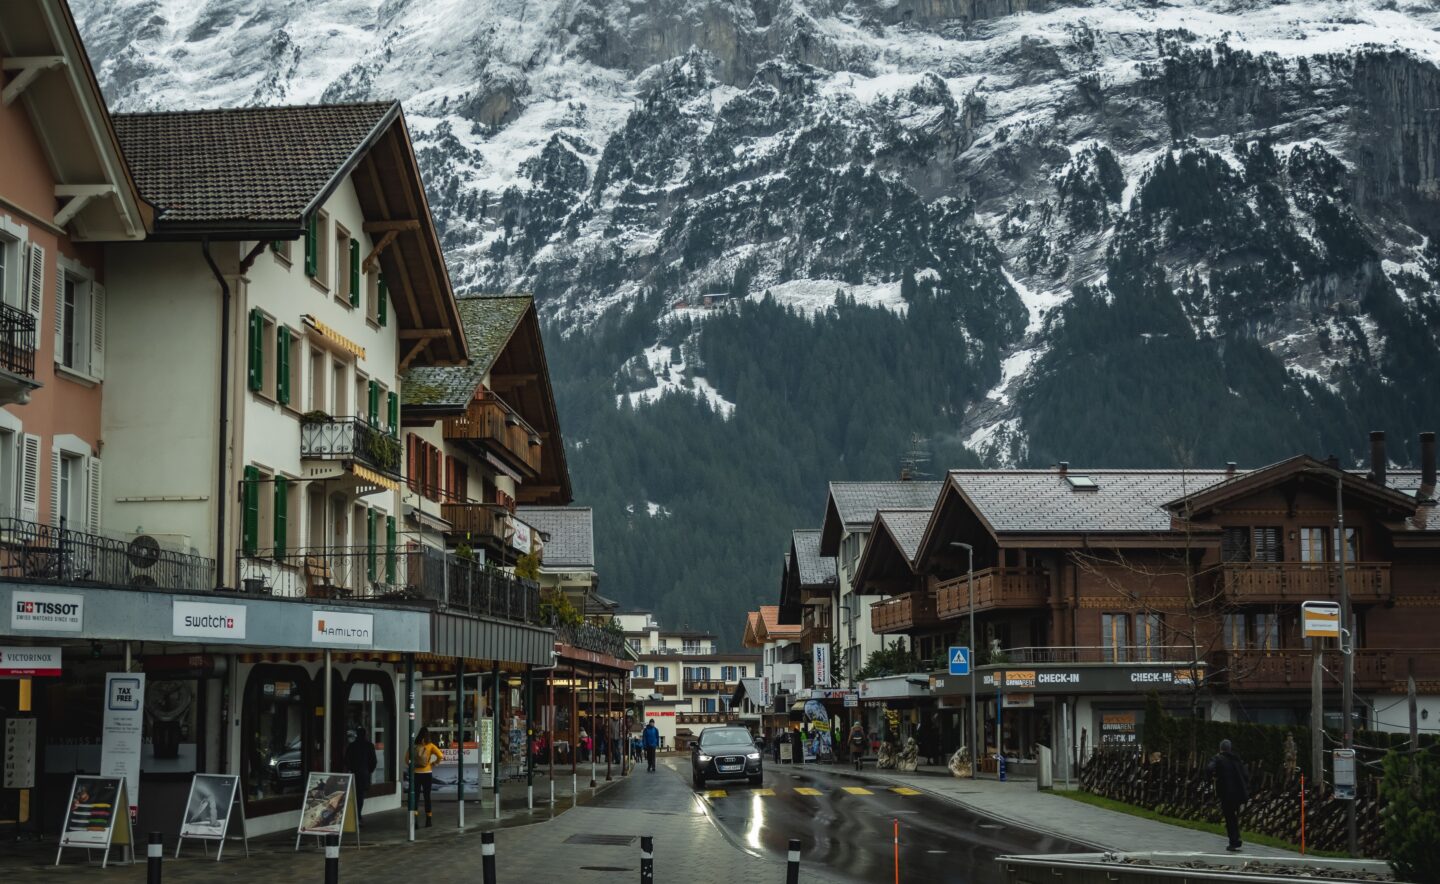 europe street with chalets and snow covered mountains in background